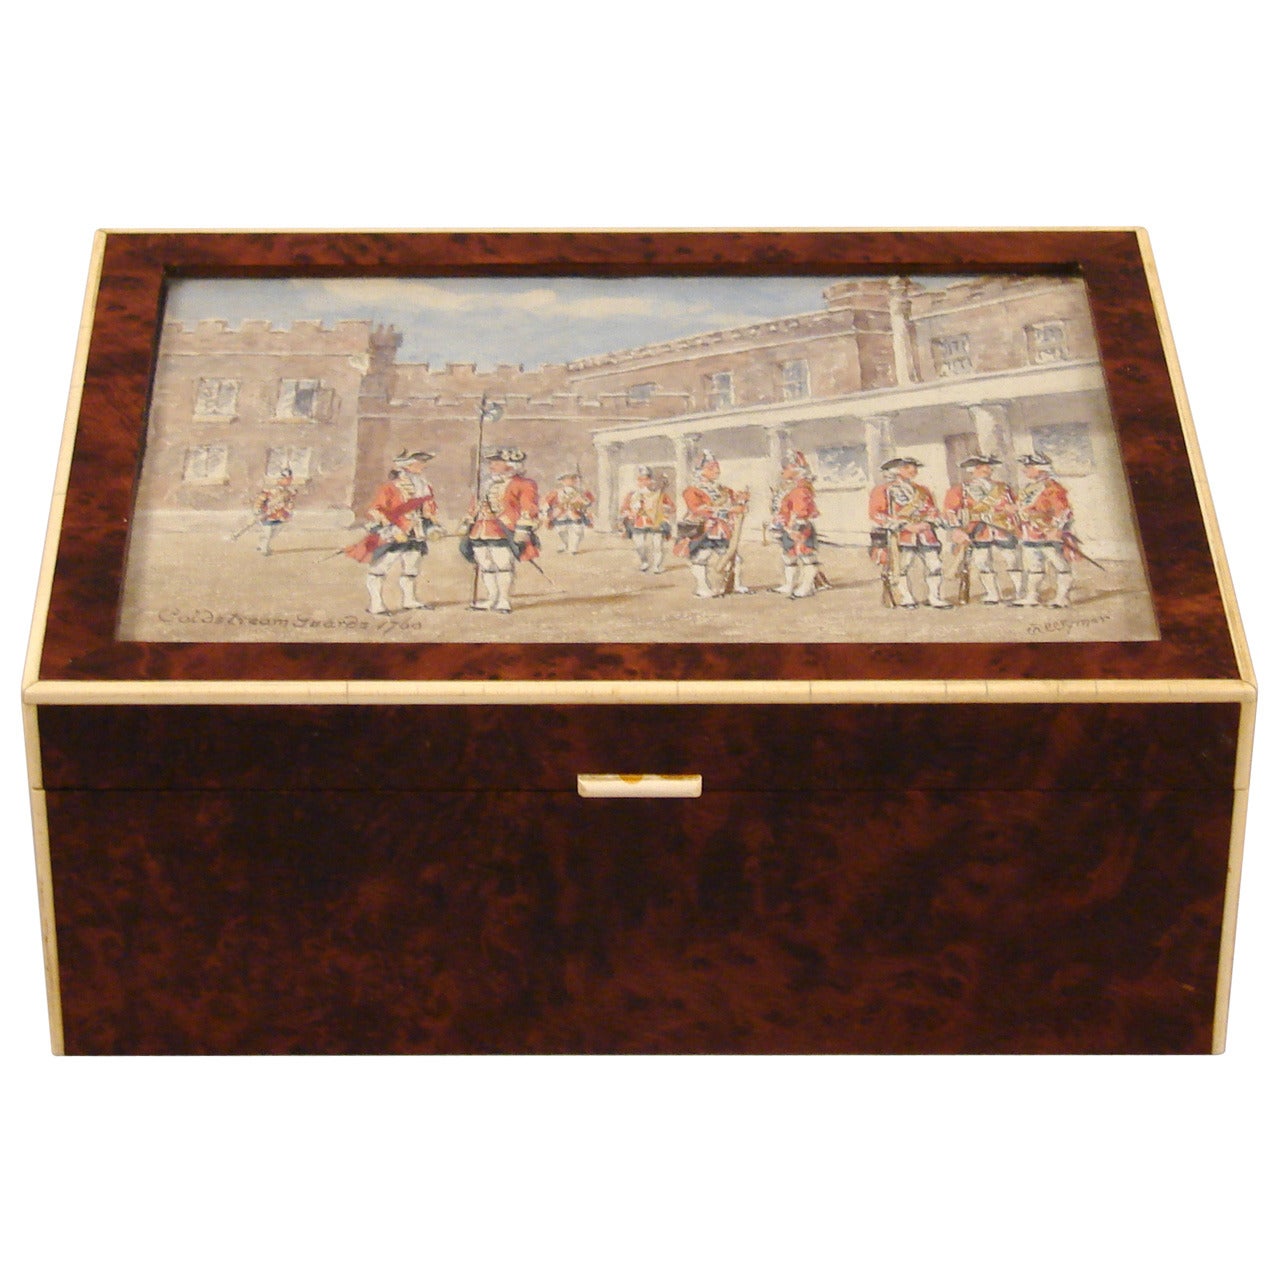 Unusual Thuya Wood Ivory Mounted Box with Original Watercolor Painting